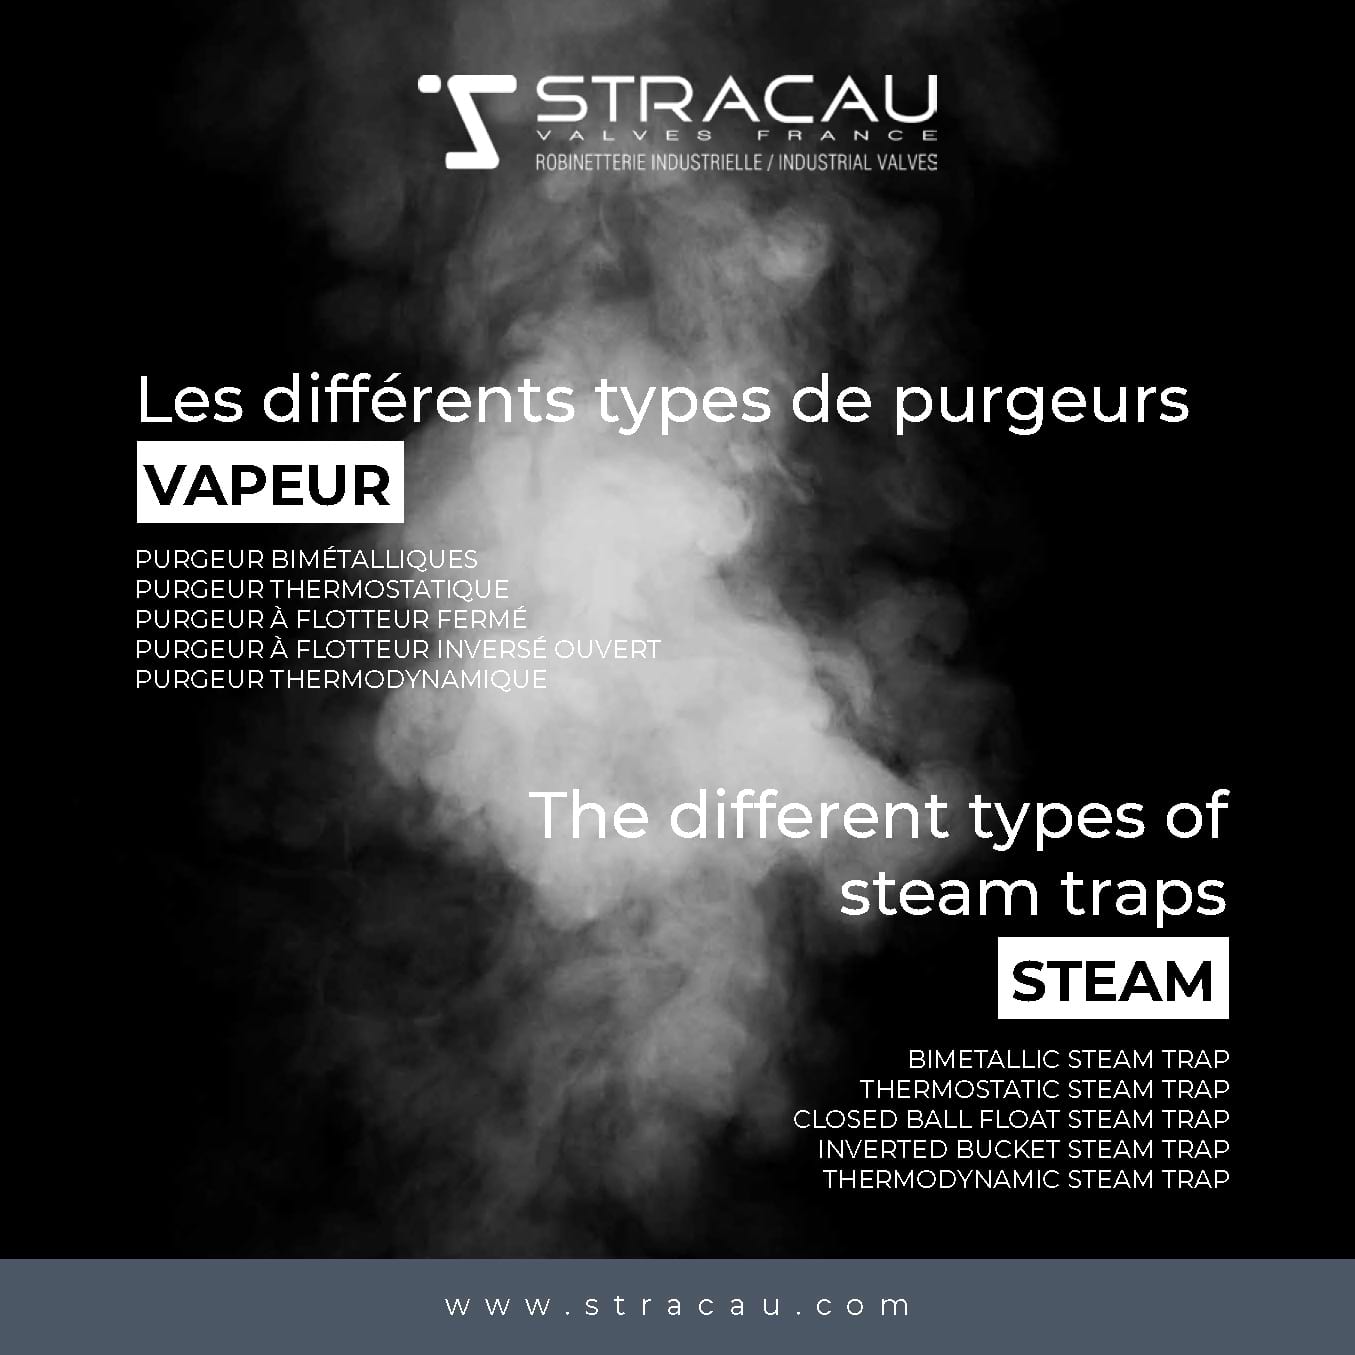 The various types of STEAM traps